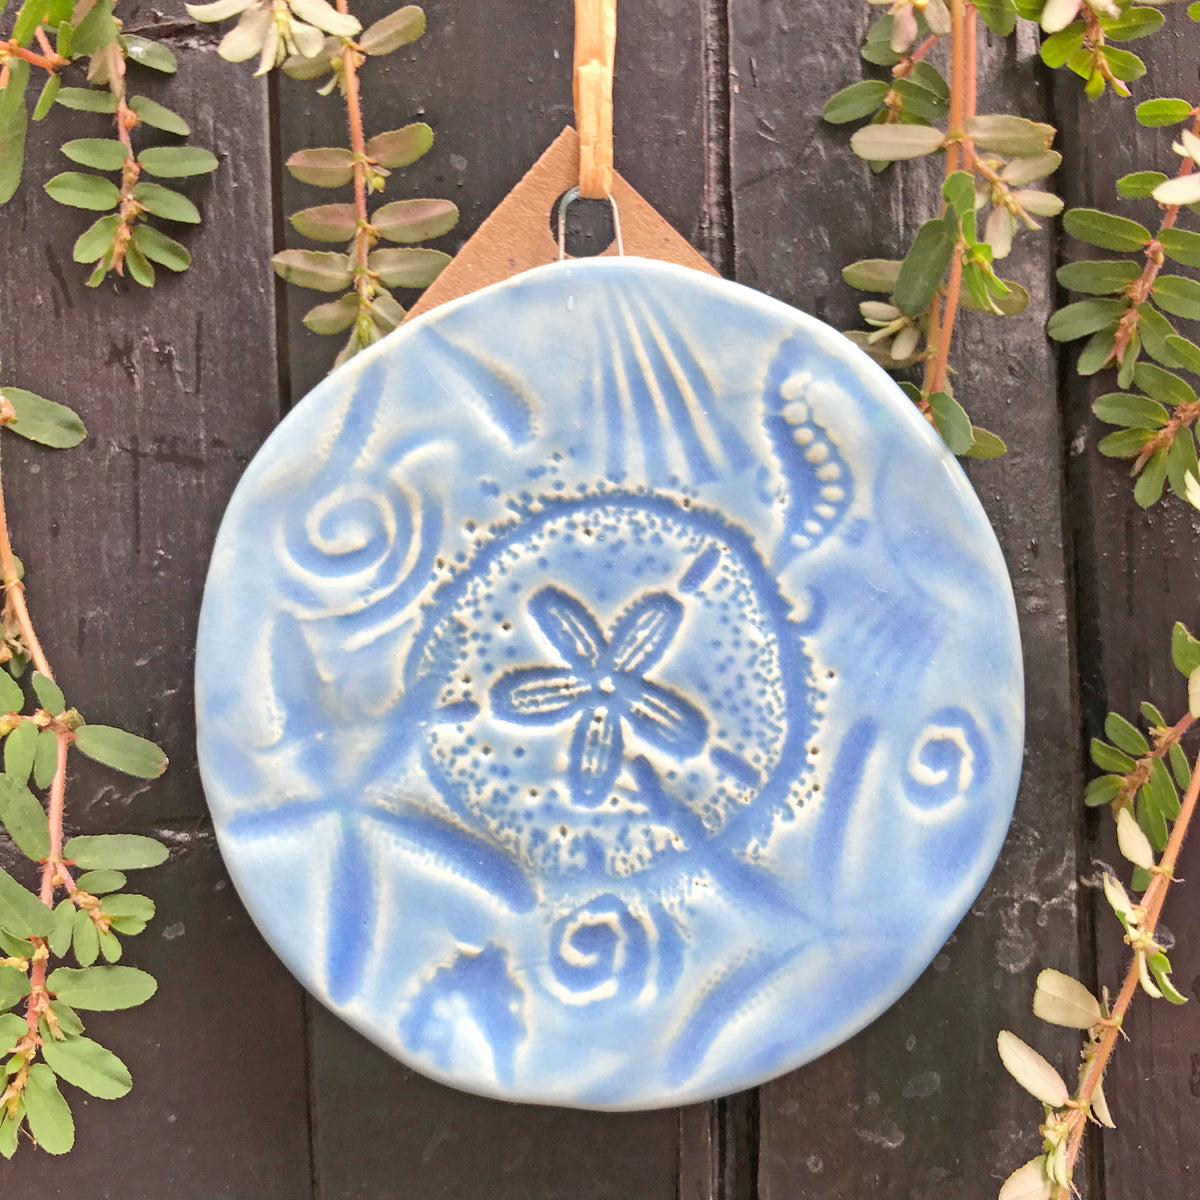 Sand Dollar Ornament crafted of earthenware clay and glazed a beautiful water-toned blue by the potters of Oerth Studio. 